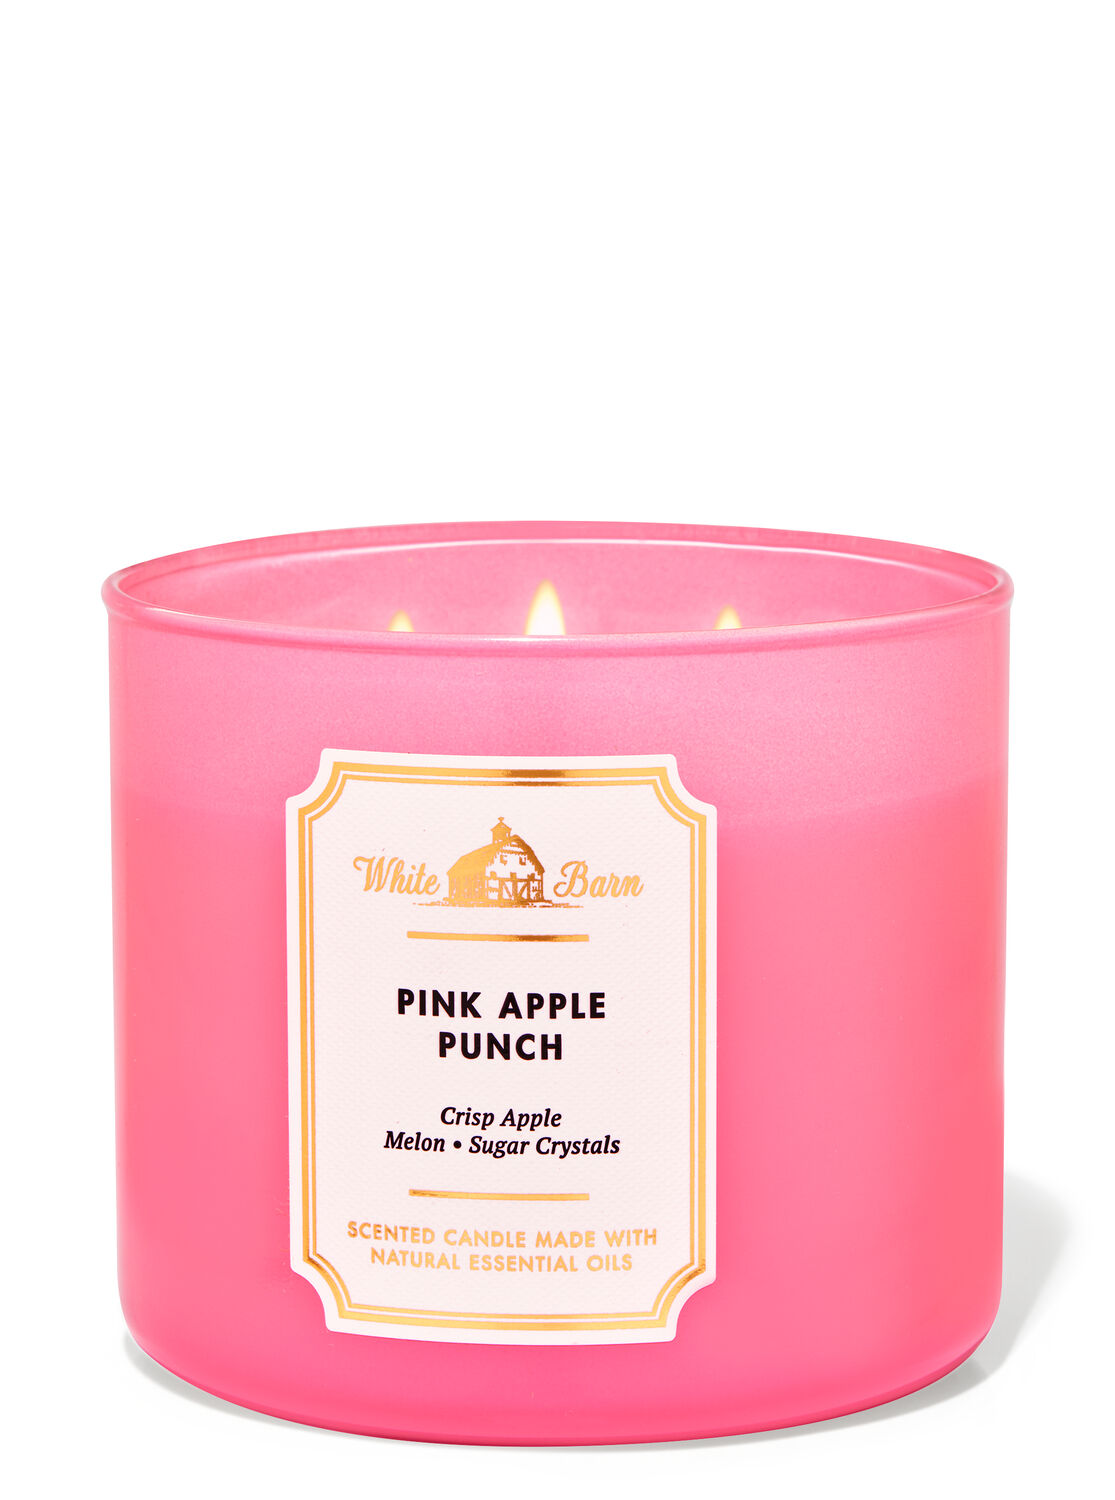 1 Bath & Body Works PINK APPLE PUNCH Large 3-Wick Candle SUMMER TRAILSIDE 